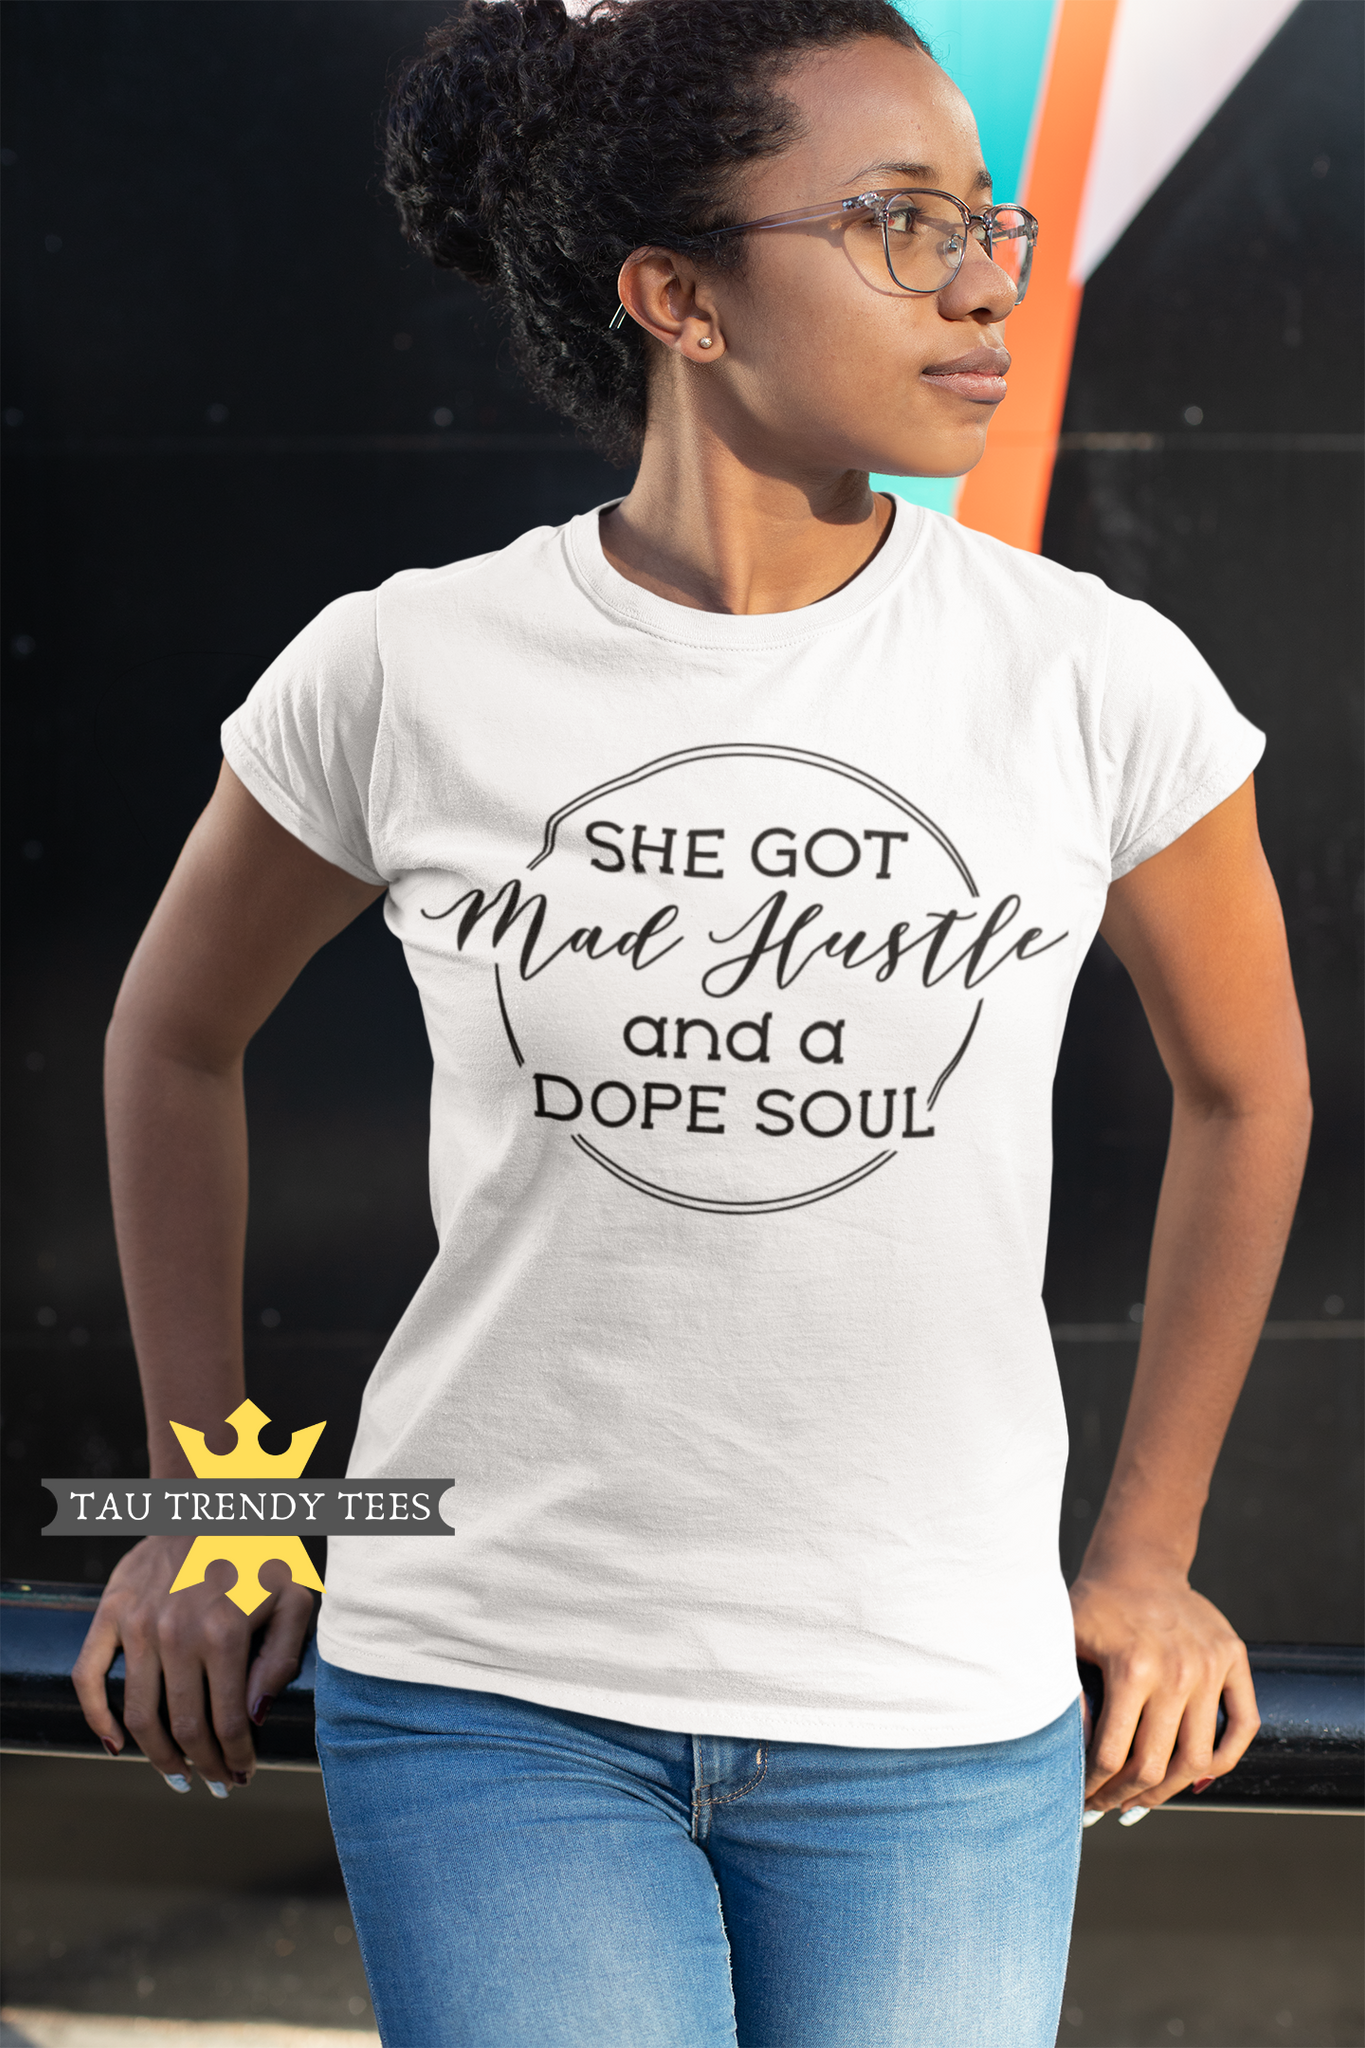 "She Got Mad Hustle and a Dope Soul" Short-Sleeve Unisex T-Shirt-T Shirts-TAU TRENDY TEES LLC-Small-White-Wear-N-Share Apparel